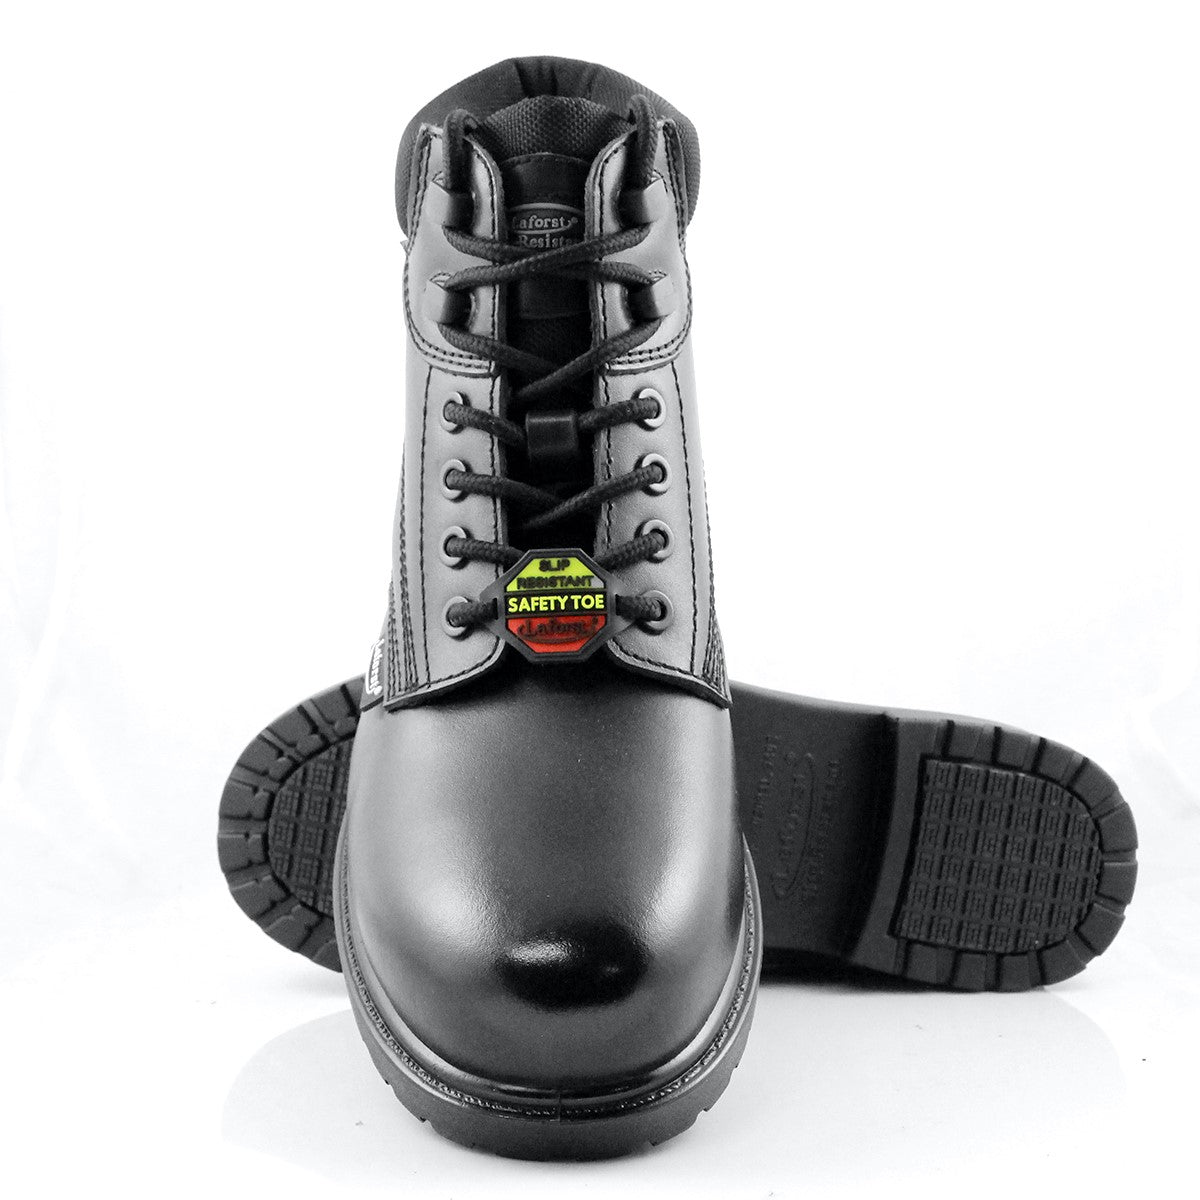 Gunther 9419-01 / Composite Safety Toe